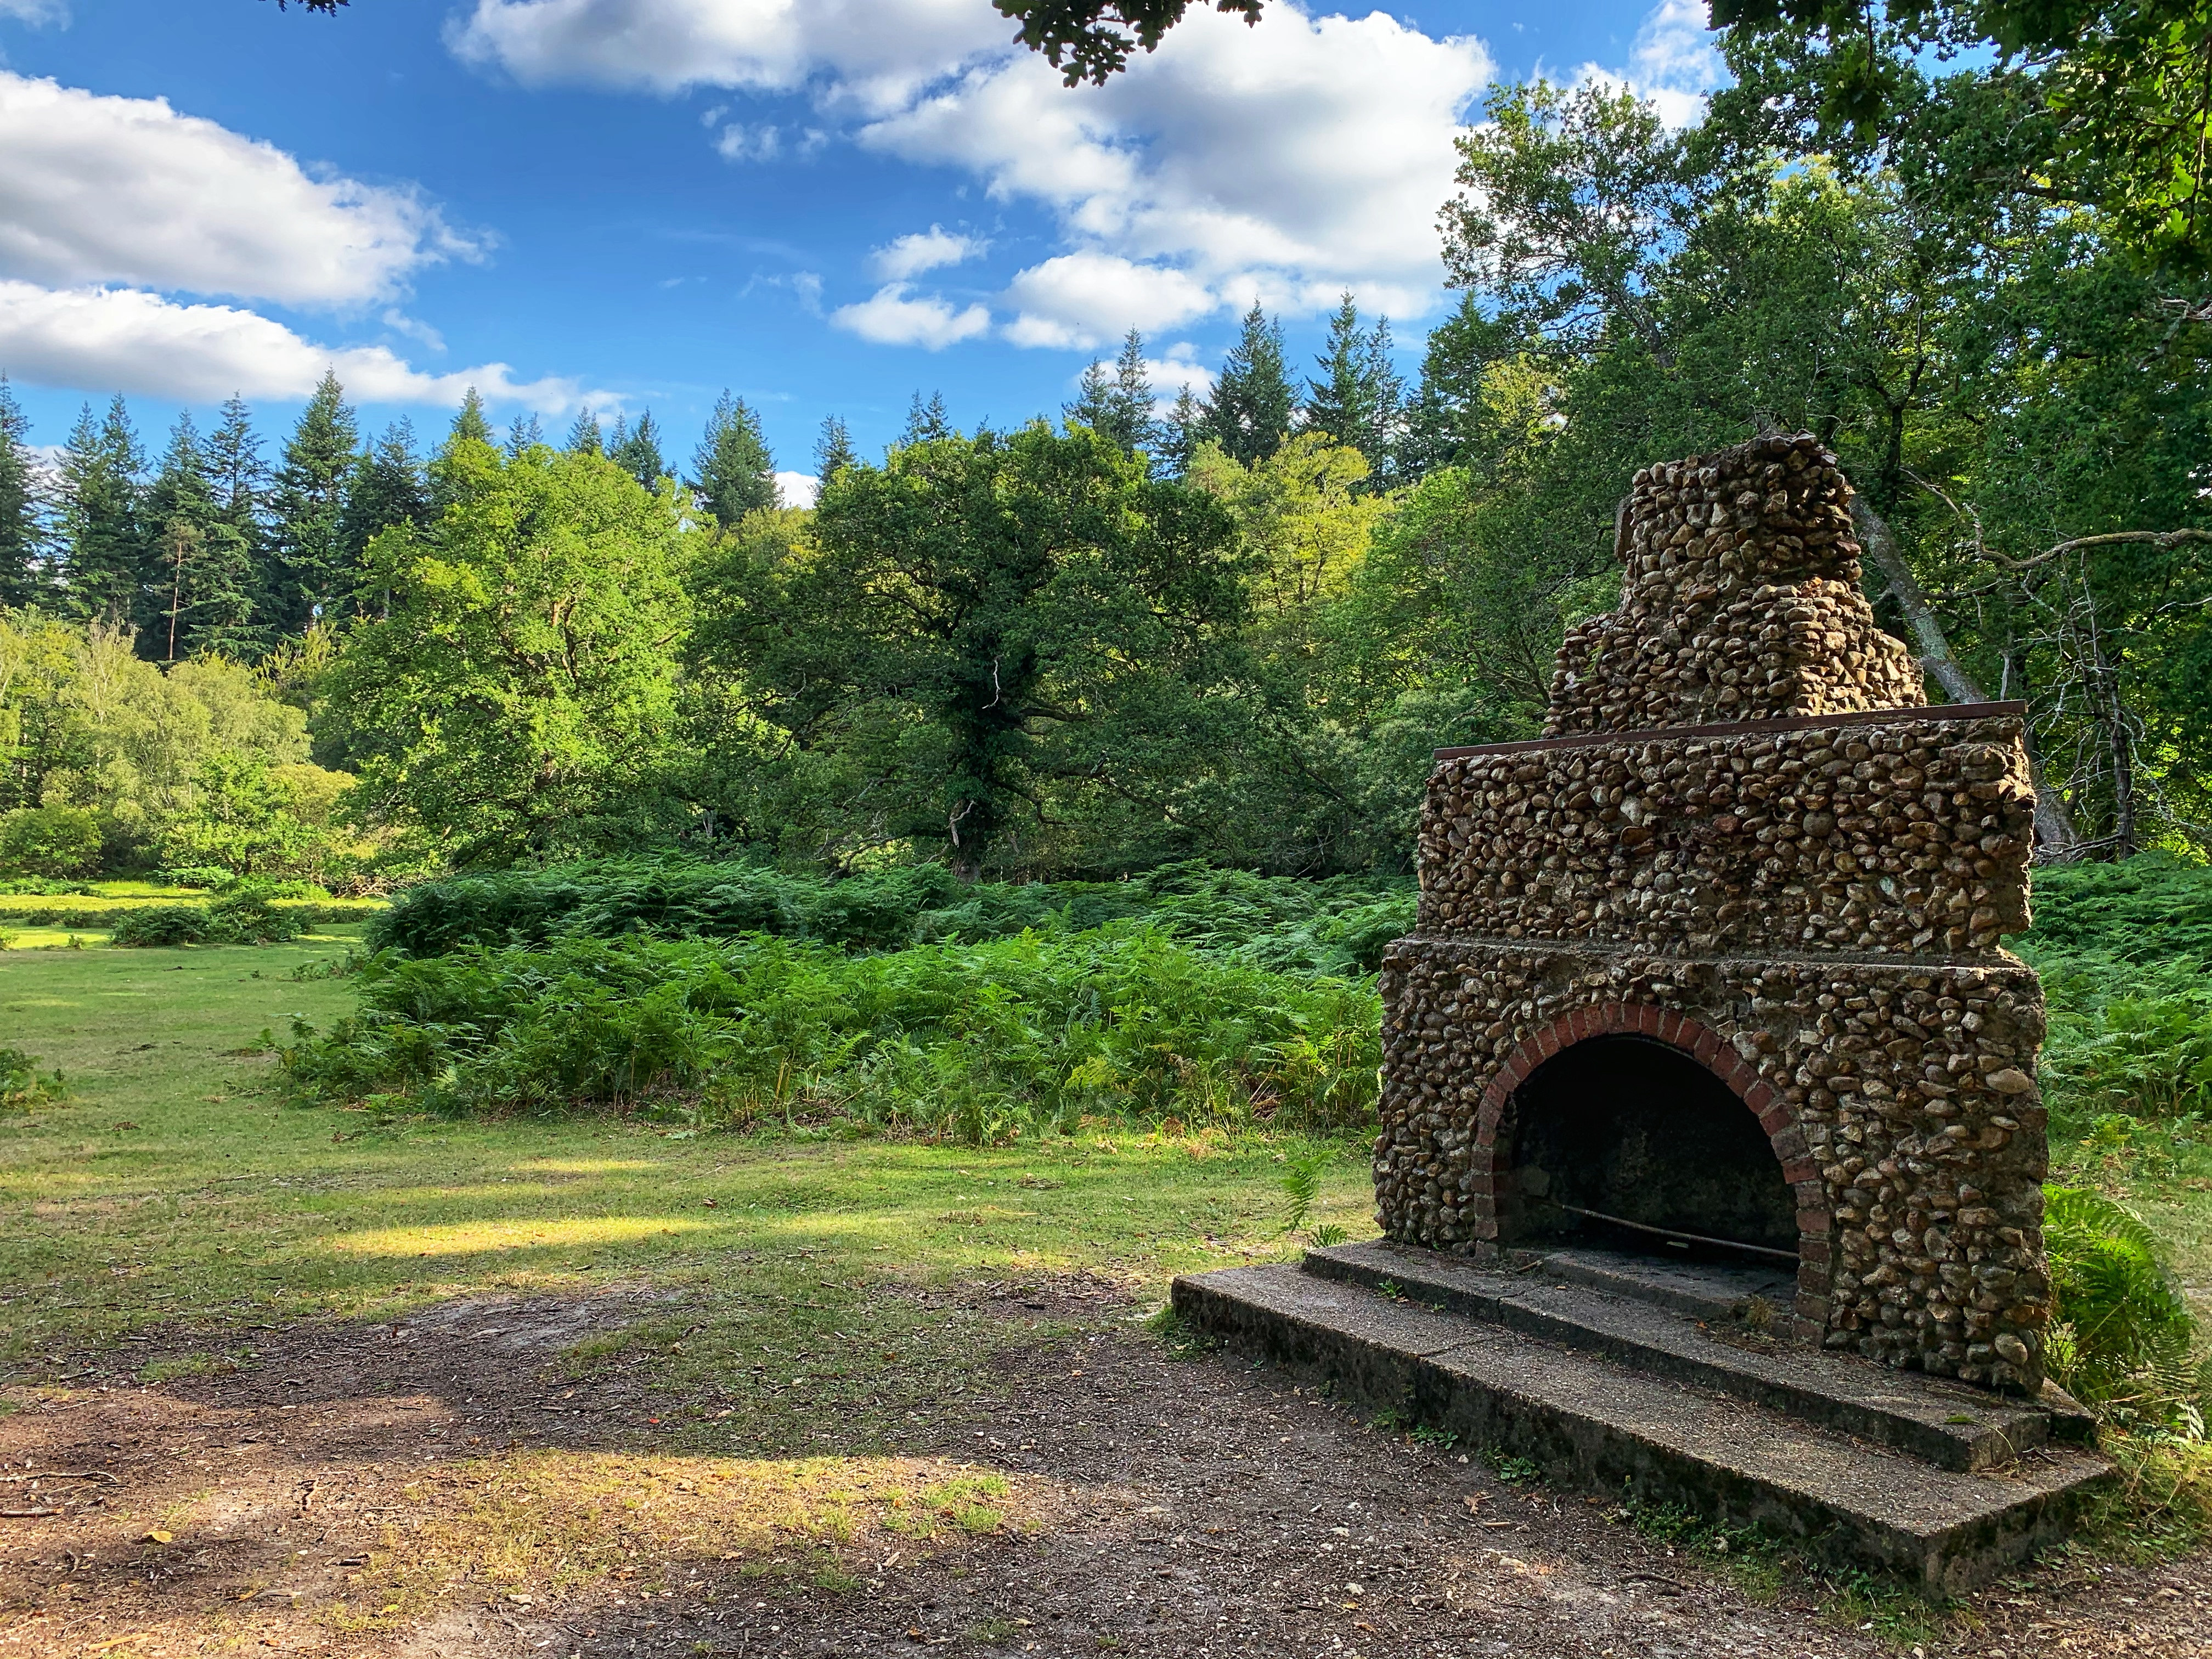 A serene scene in the New Forest, UK, featuring a rustic stone fireplace surrounded by lush greenery and dense woodland. The vibrant foliage under a bright blue sky with scattered clouds creates a peaceful and inviting atmosphere. The open grassy area and tall trees add to the natural beauty of this tranquil setting.